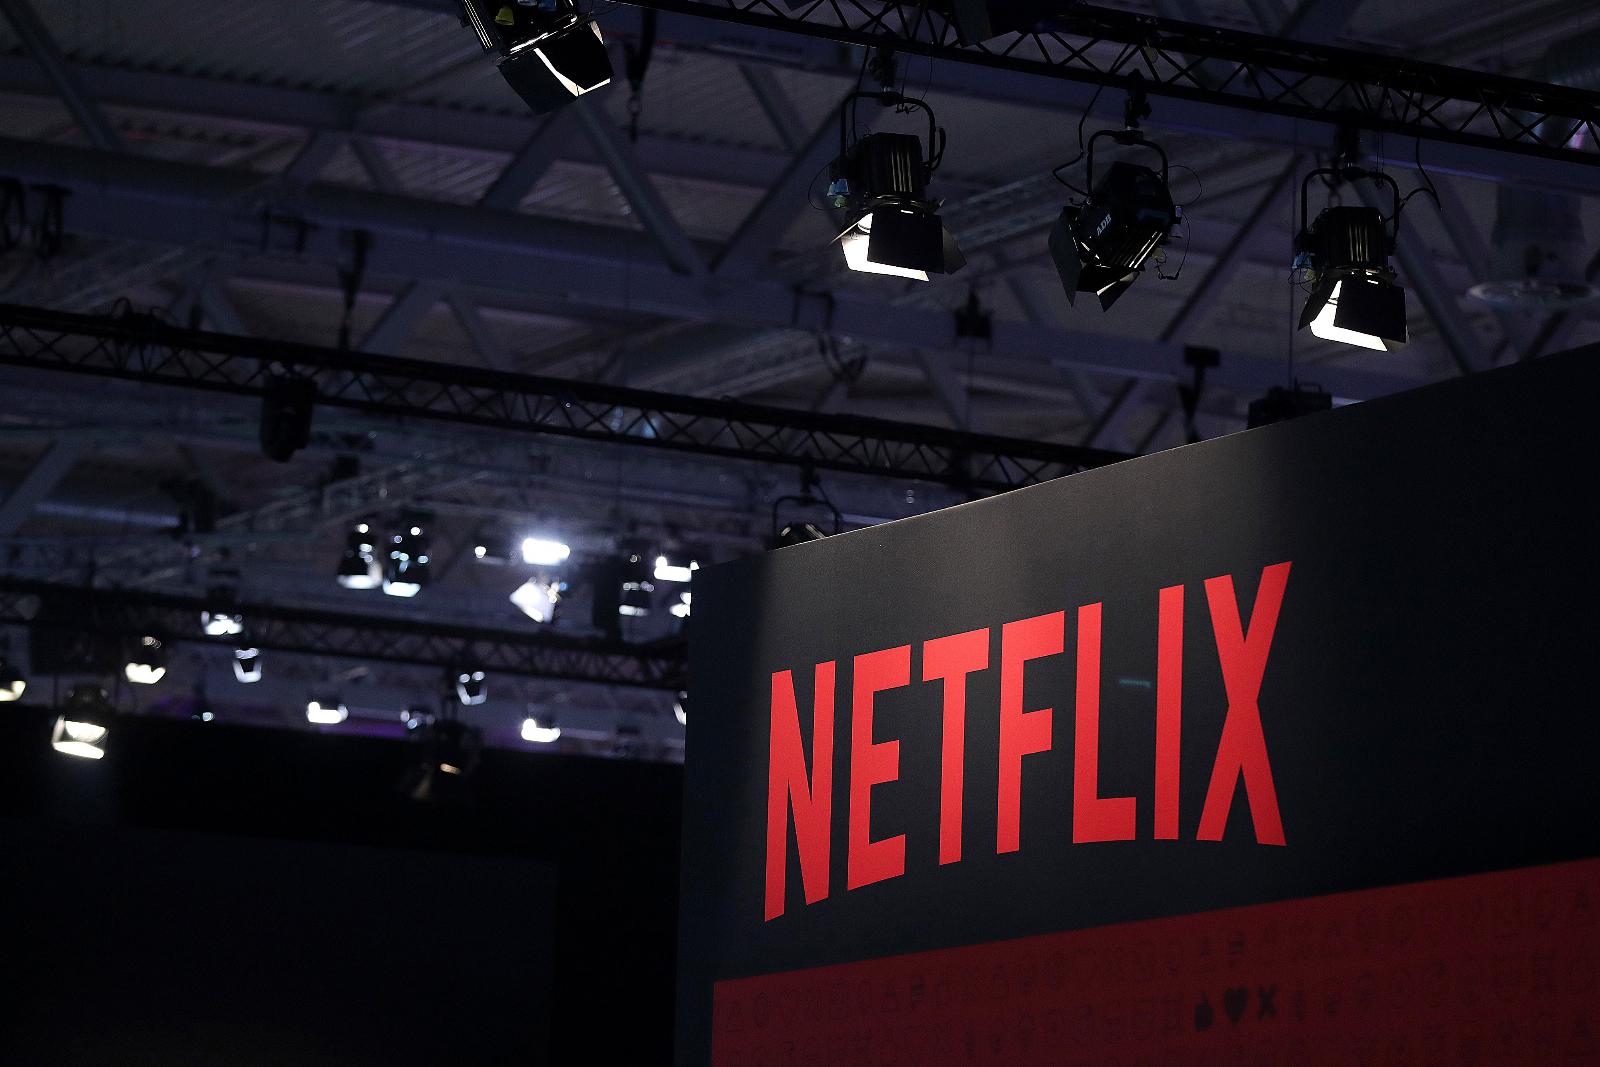 Netflix considers adding in-app purchases and ads to games, report says